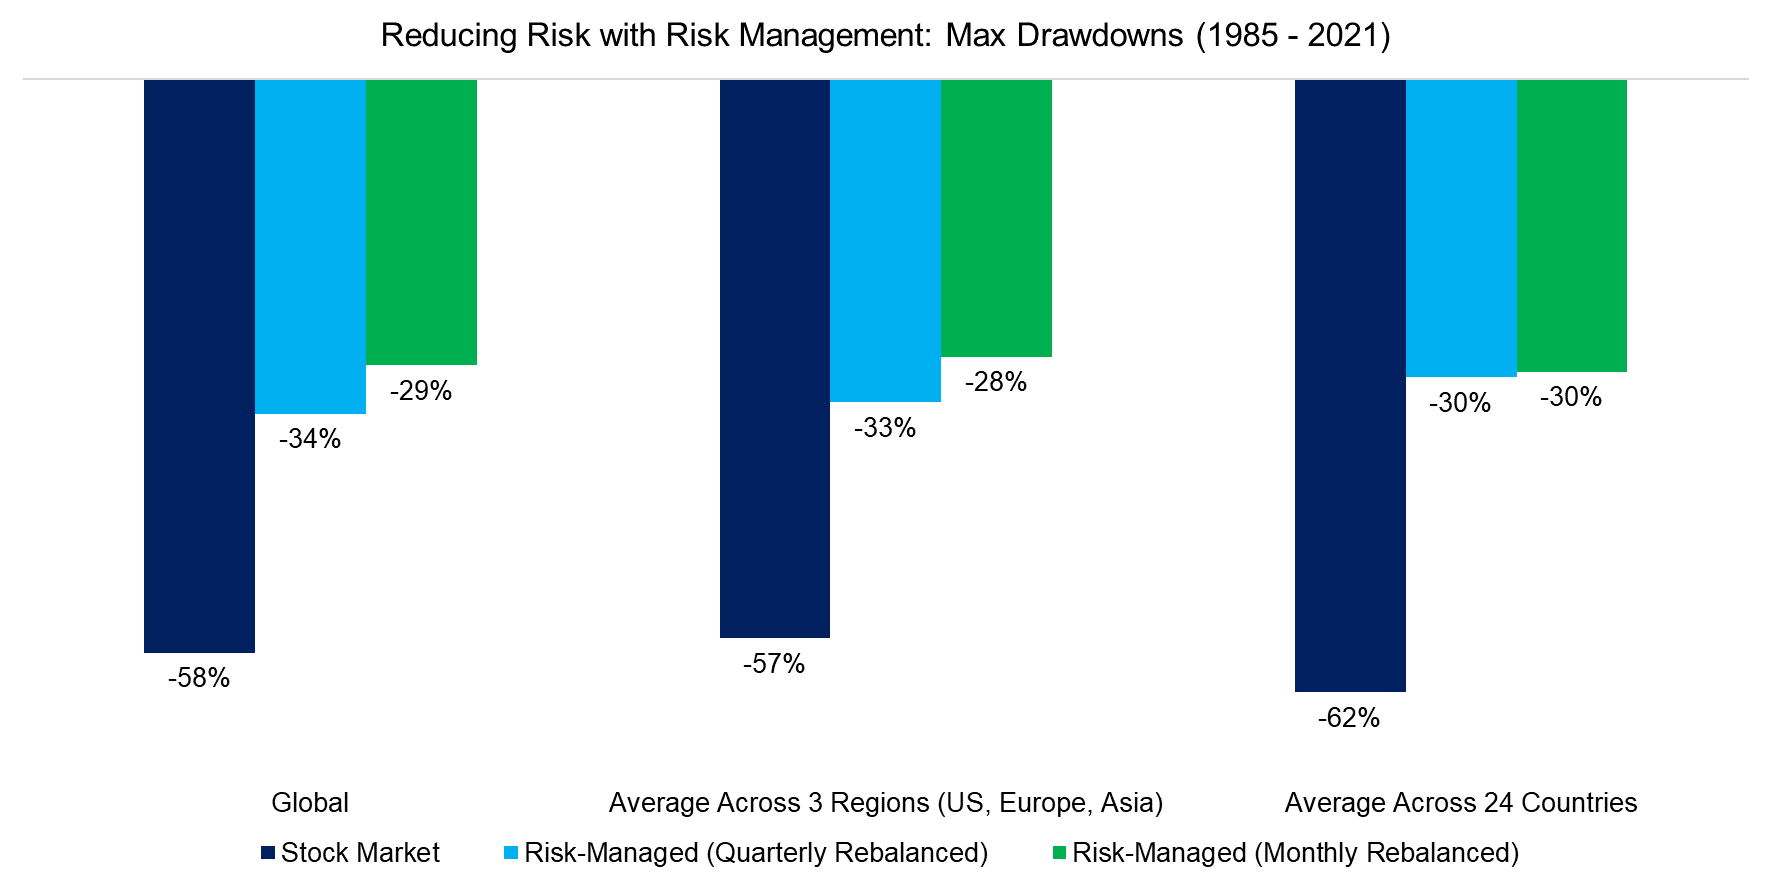 Reducing Risk with Risk Management Max Drawdowns (1985 - 2021)